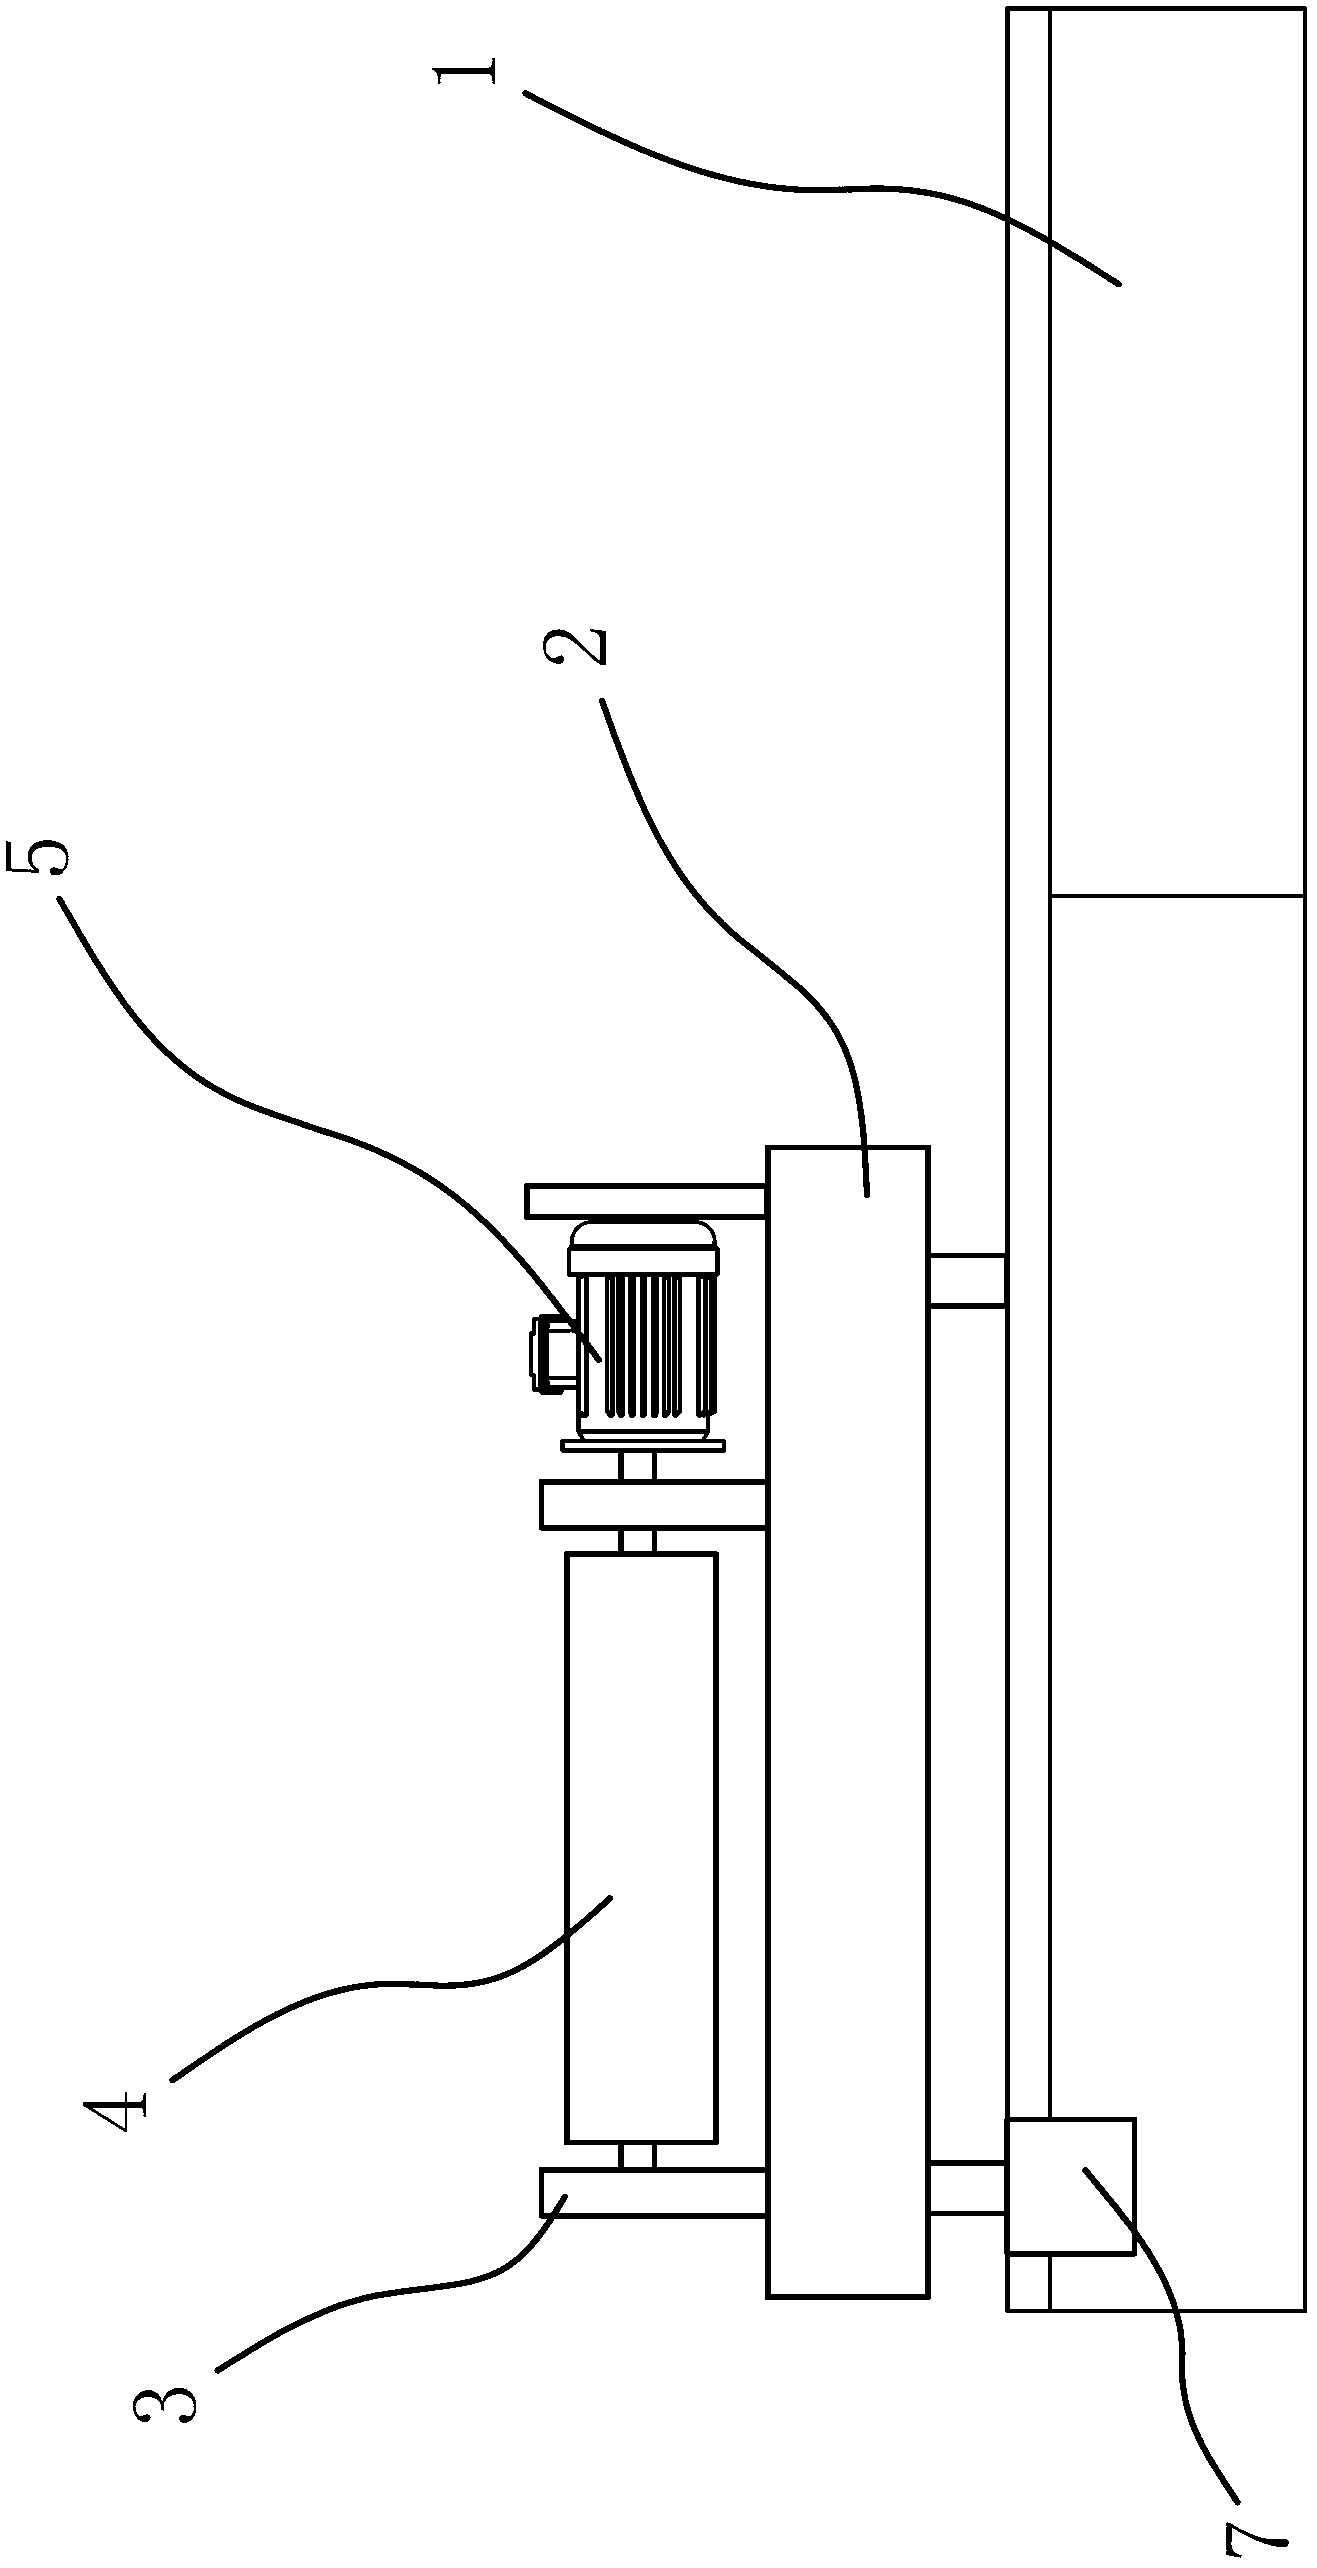 A manufacturing method for a continuous fiber winding reinforced thermoplastic tube and a winding device